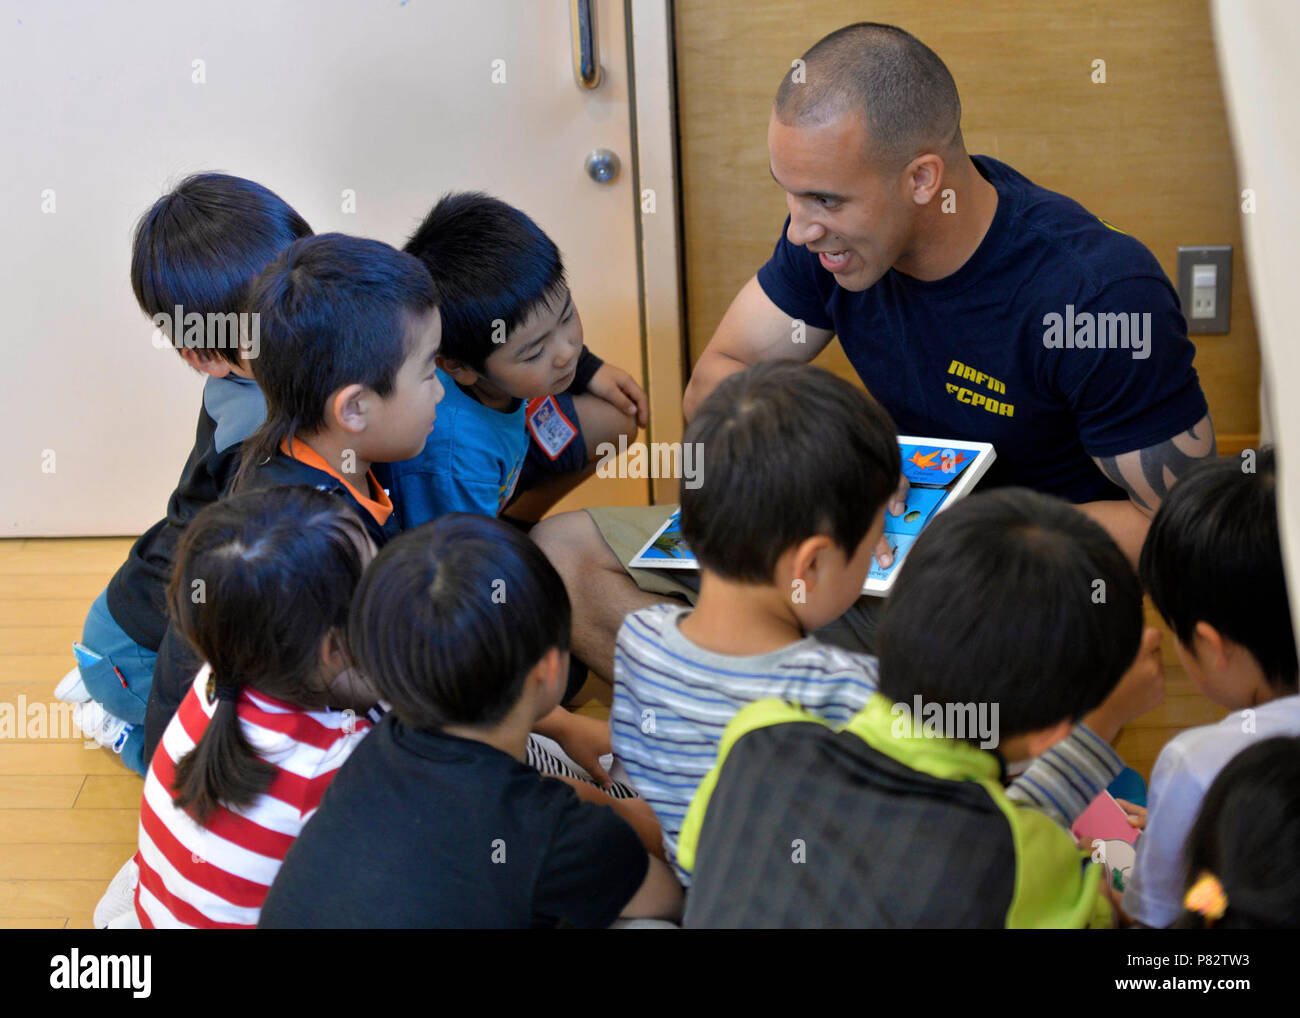 MISAWA, Japan (June 27, 2016) Information Sytems Technician 1st Class Ryan McNair, attached to Naval Air Facility Misawa (NAFM), from Gulfport, Miss., practices english with the children at the Ohzora Jido-Kan, a Japanese after school care center. Sailors from NAFM volunteer to make bi-weekly visits to the after school care center as part of community relations efforts. Stock Photo